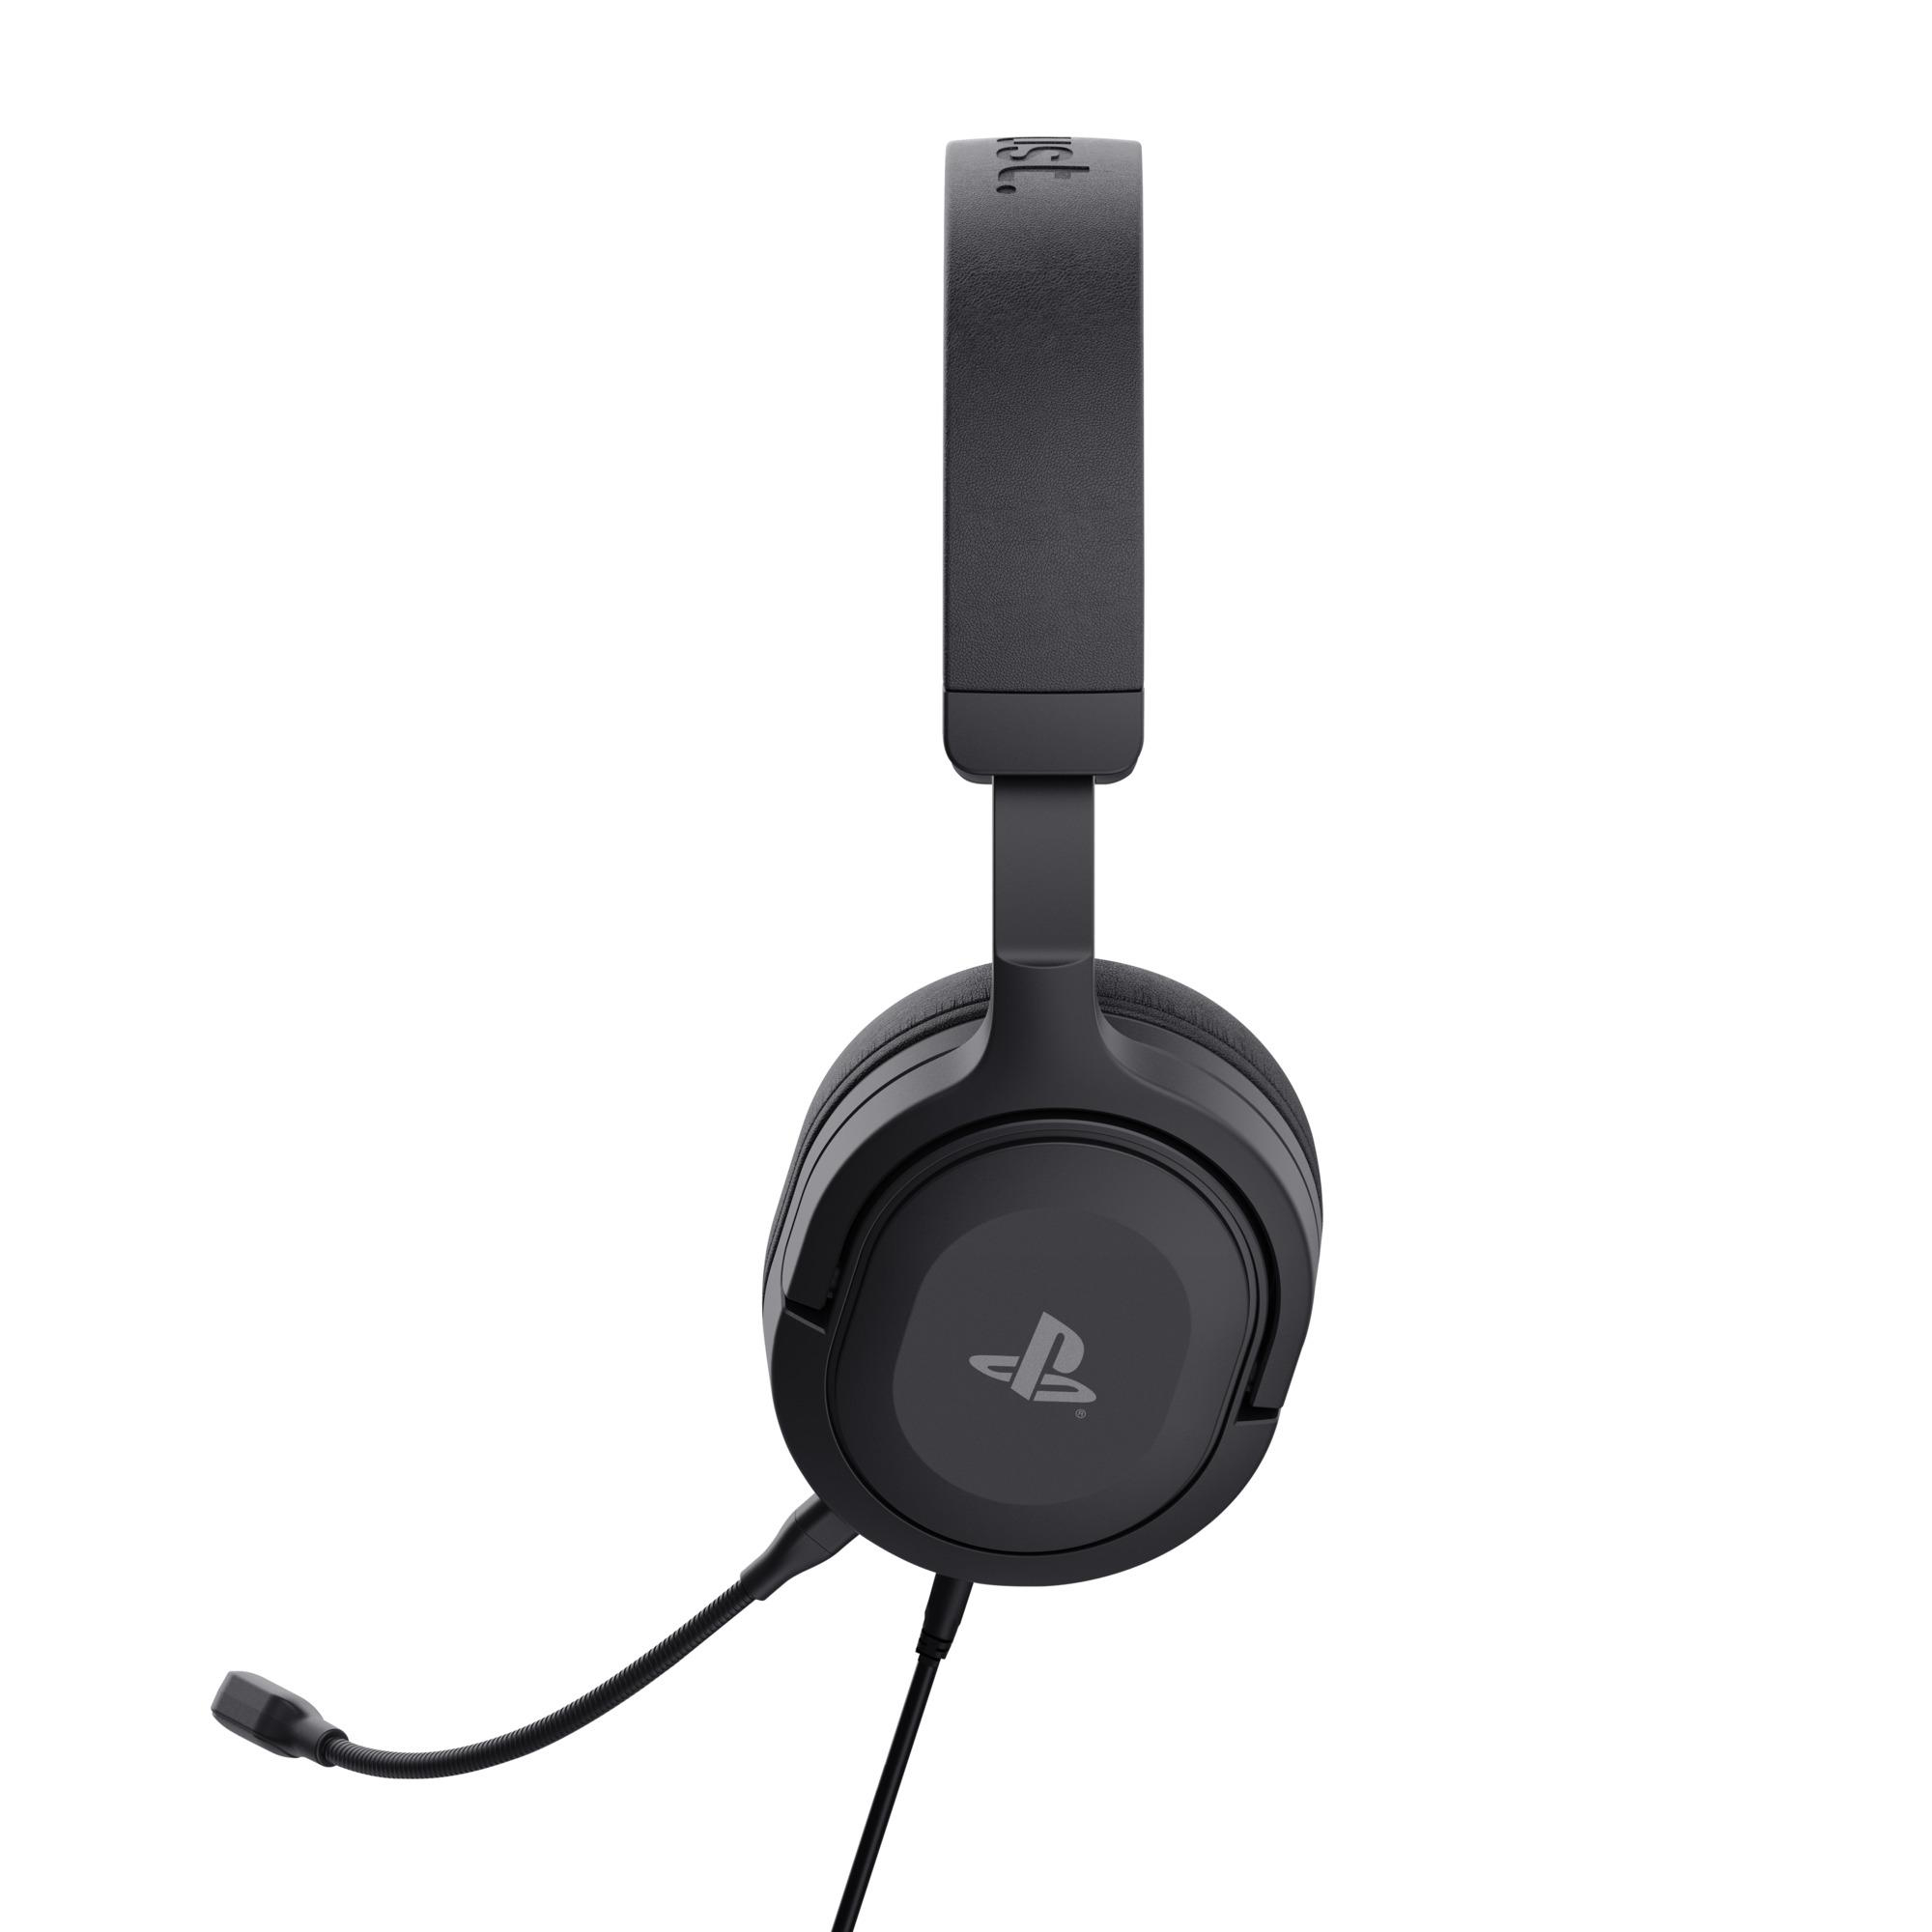 Forta GXT Over-ear für Gaming PS5™, TRUST Schwarz Gaming-Headset 498 Headset